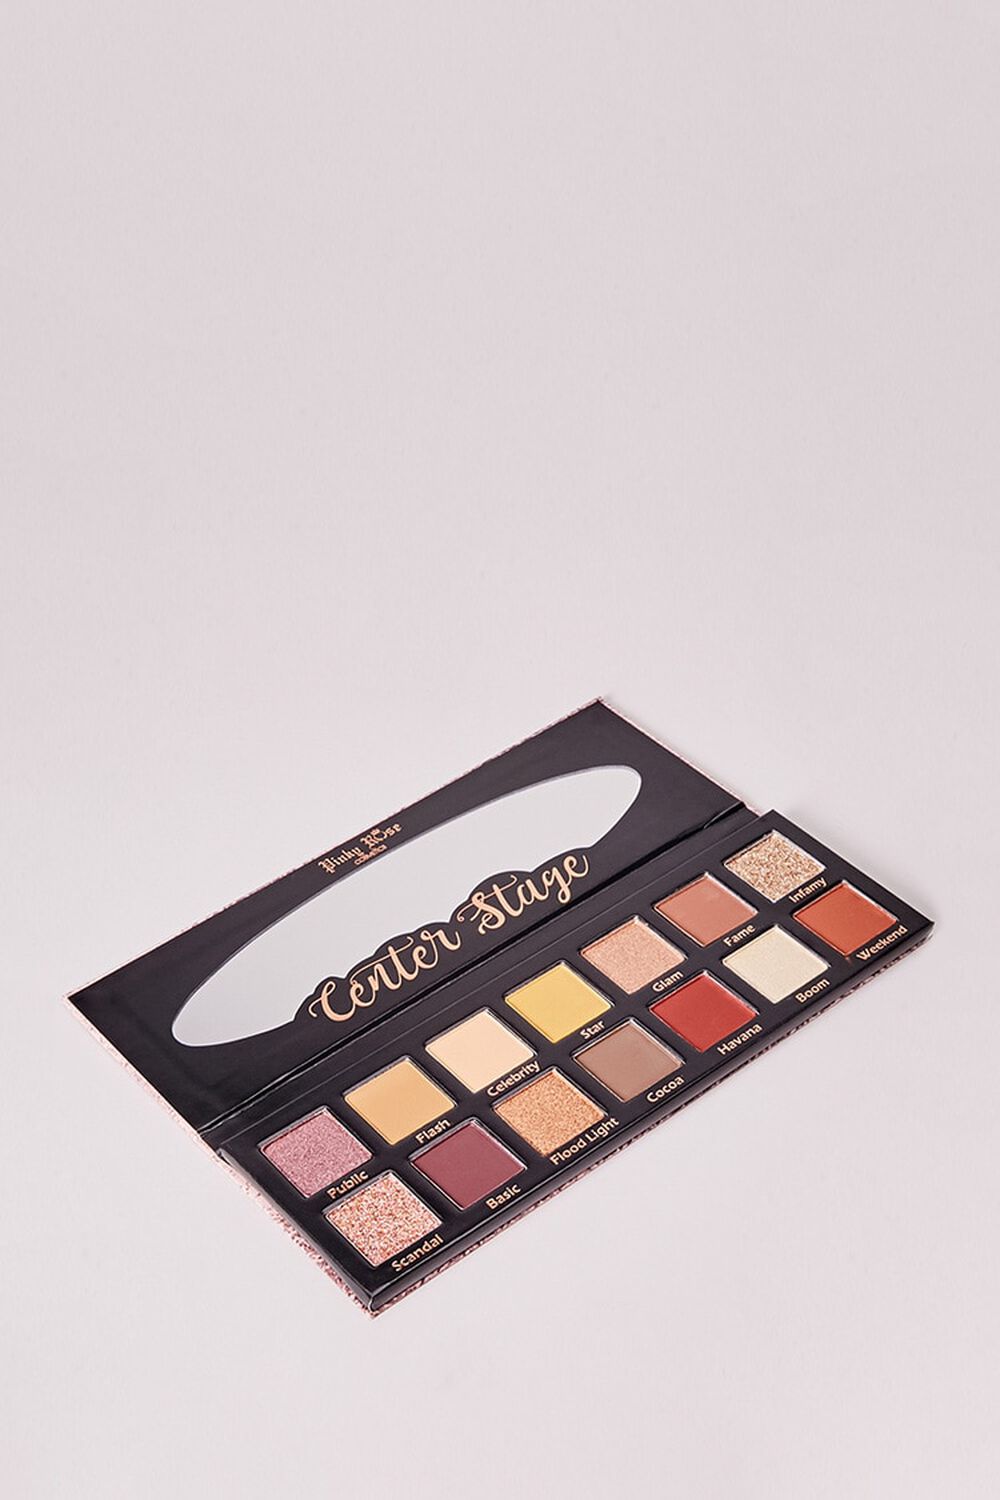 CENTER STAGE Pinky Rose Center Stage Eyeshadow Palette, image 1